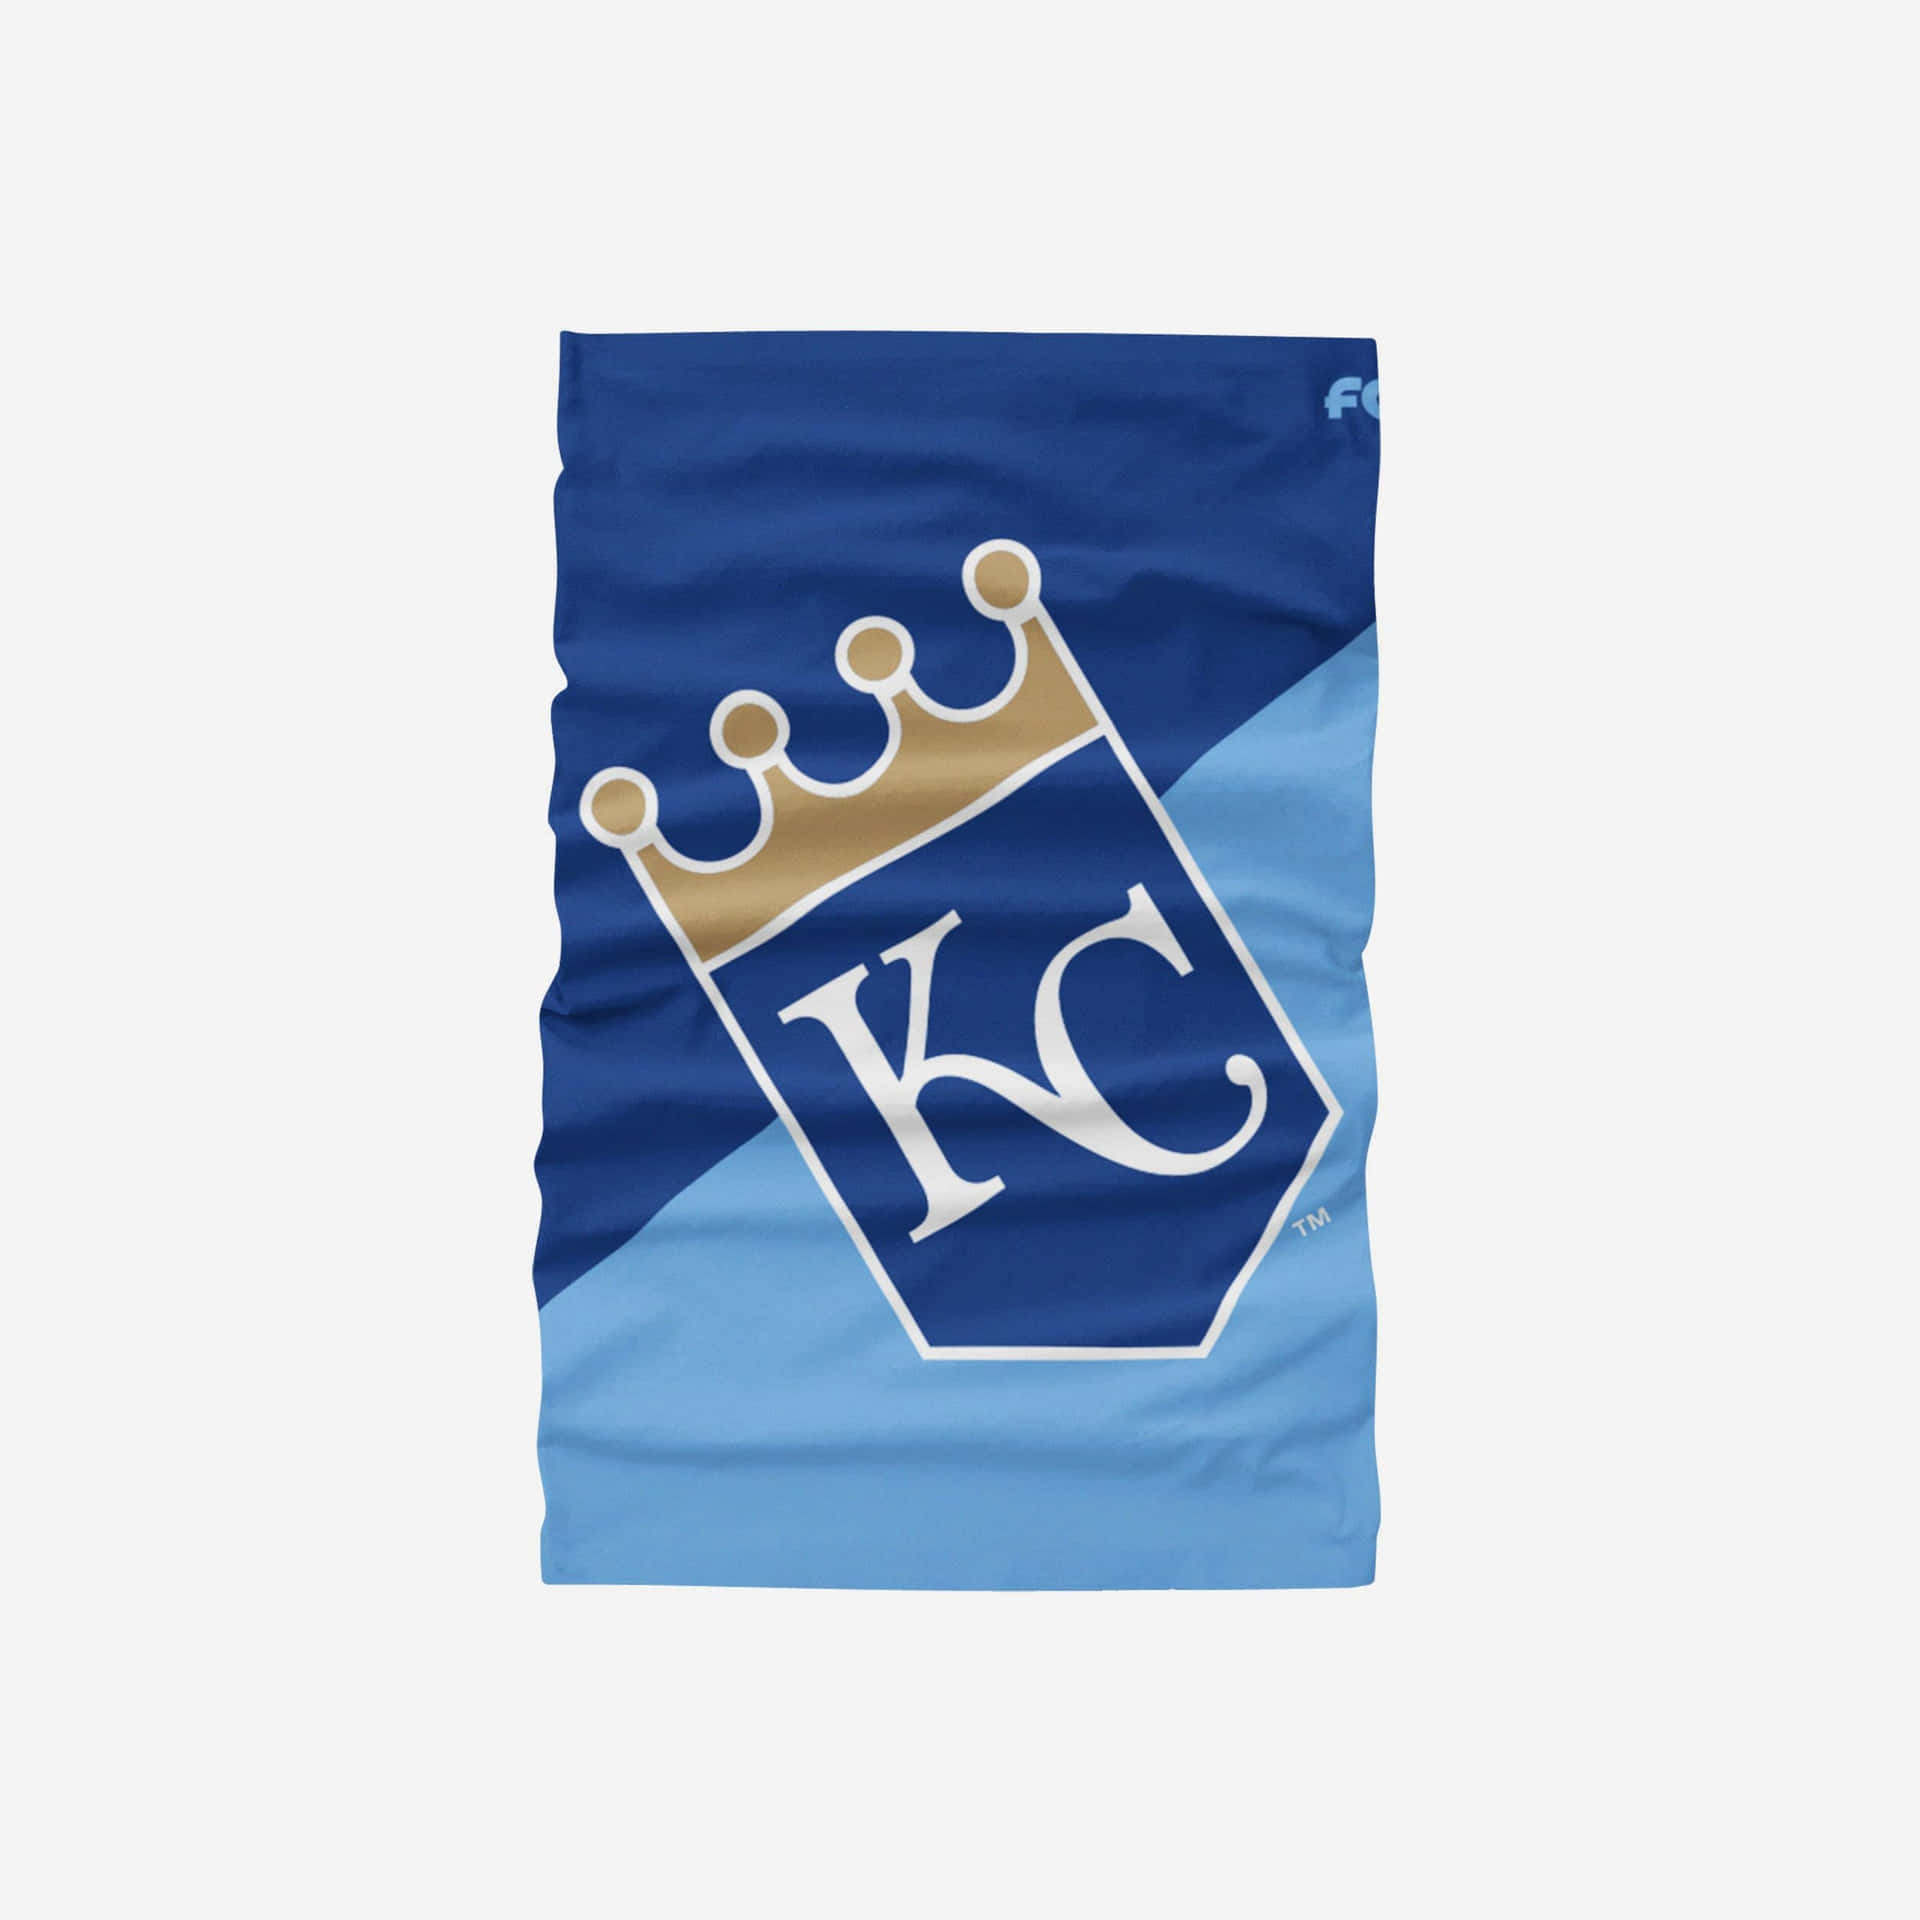 Download A Perfect Summer Spectacle- The KC Royals at Iconic